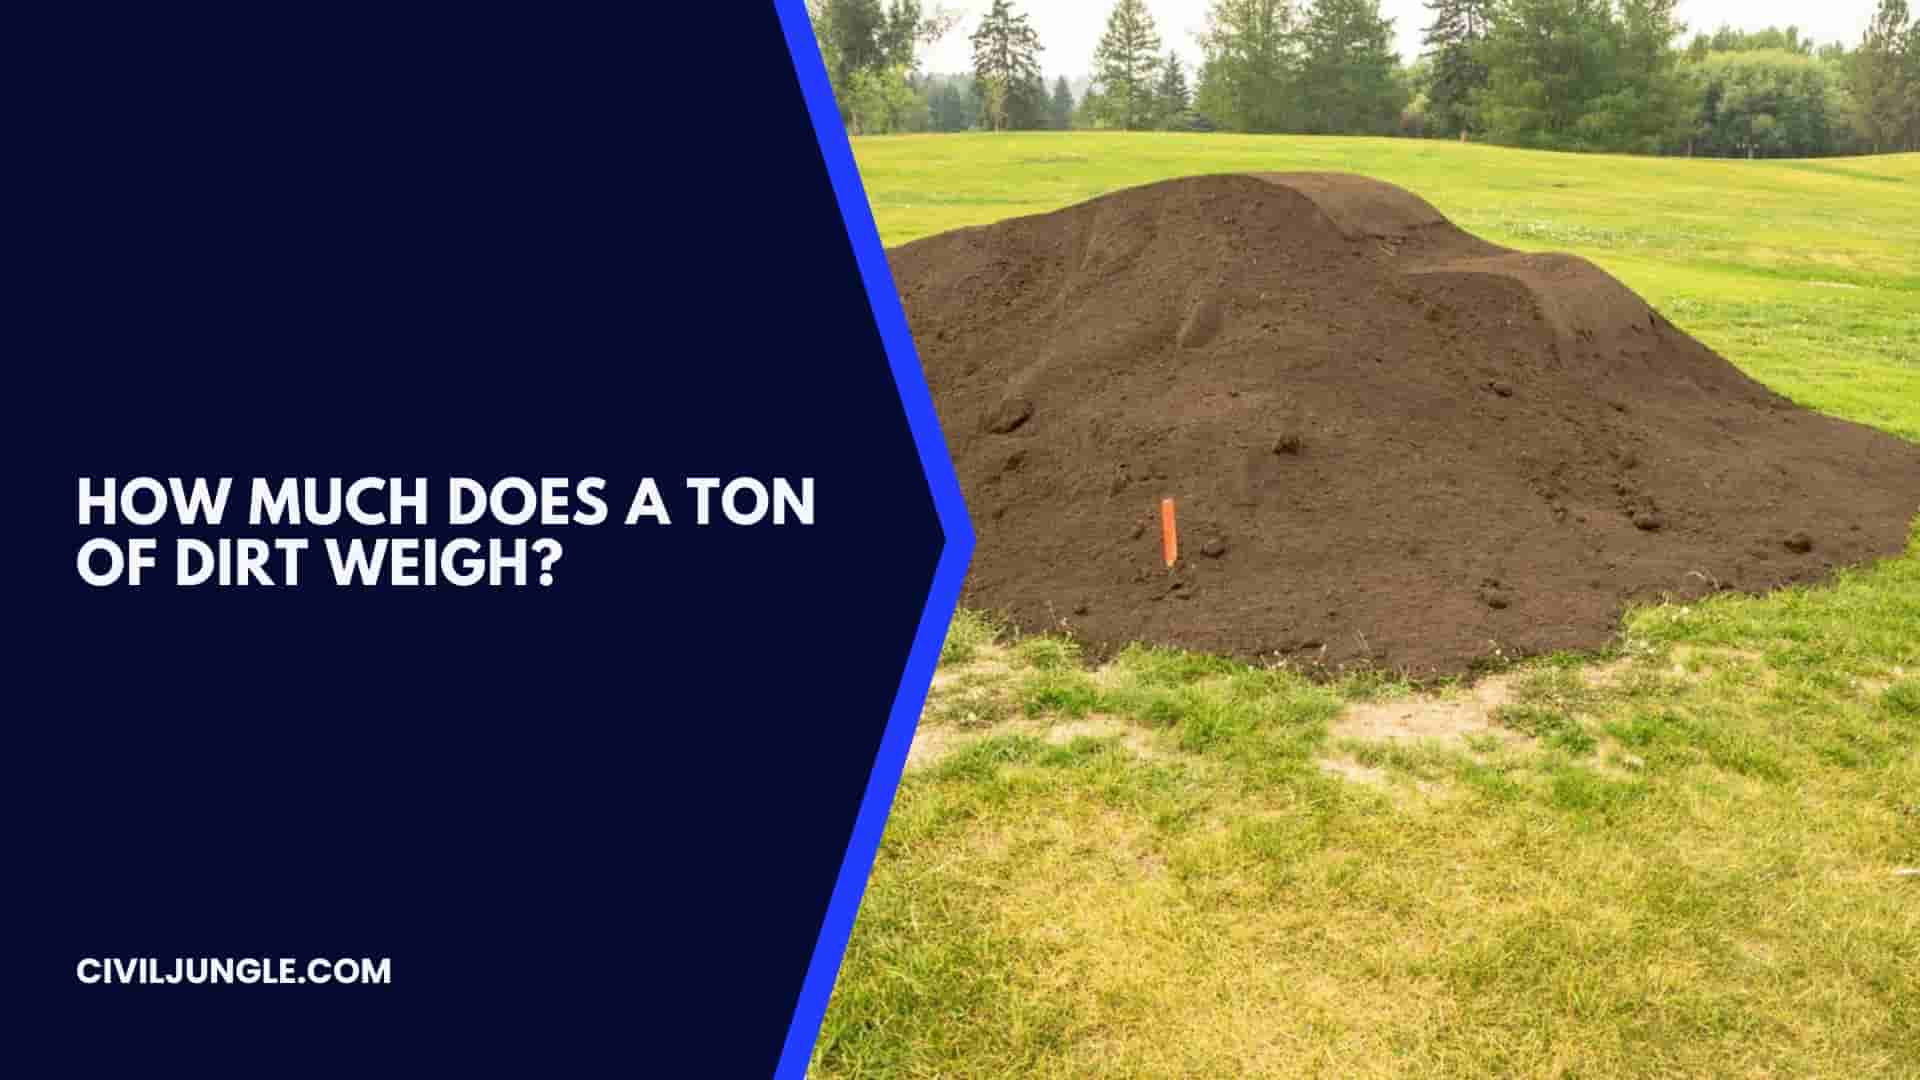 How Much Does a Ton of Dirt Weigh?